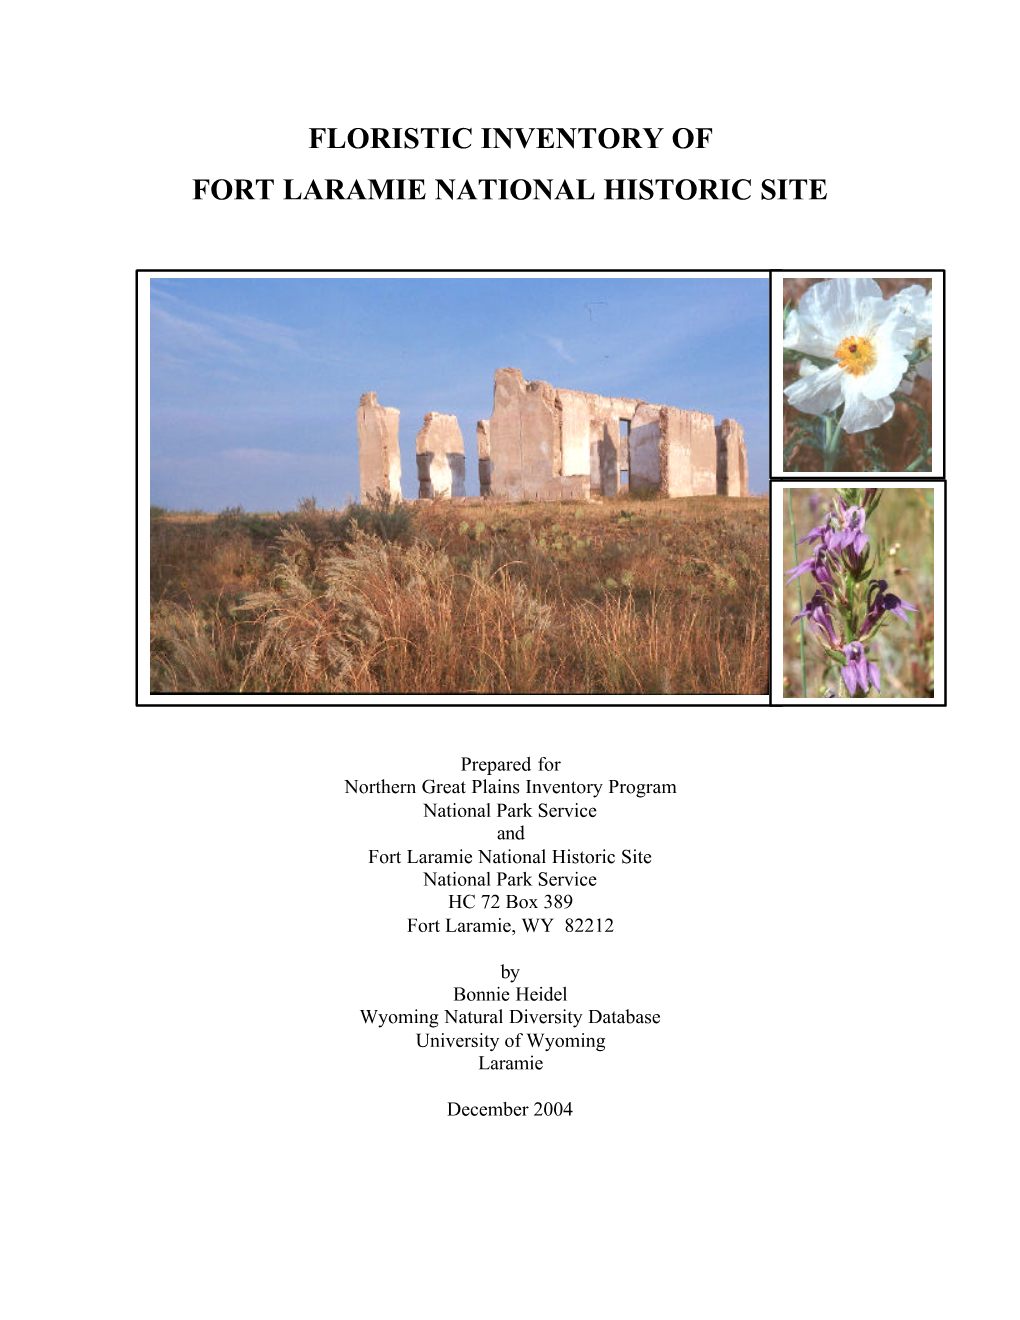 Floristic Inventory of Fort Laramie National Historic Site